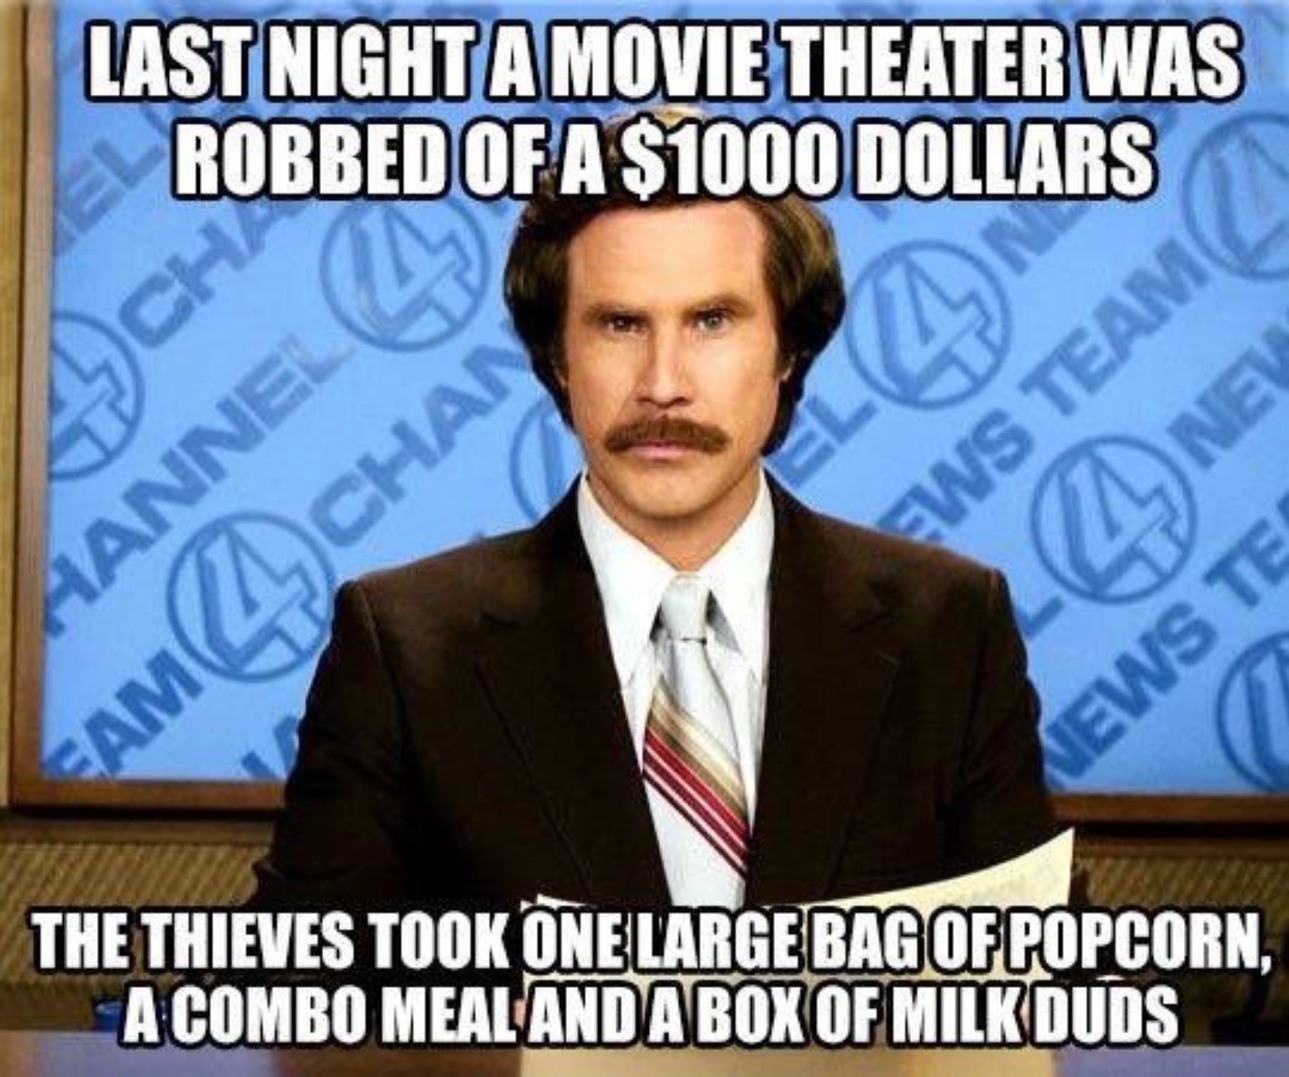 Movie theaters are expensive, though. - meme